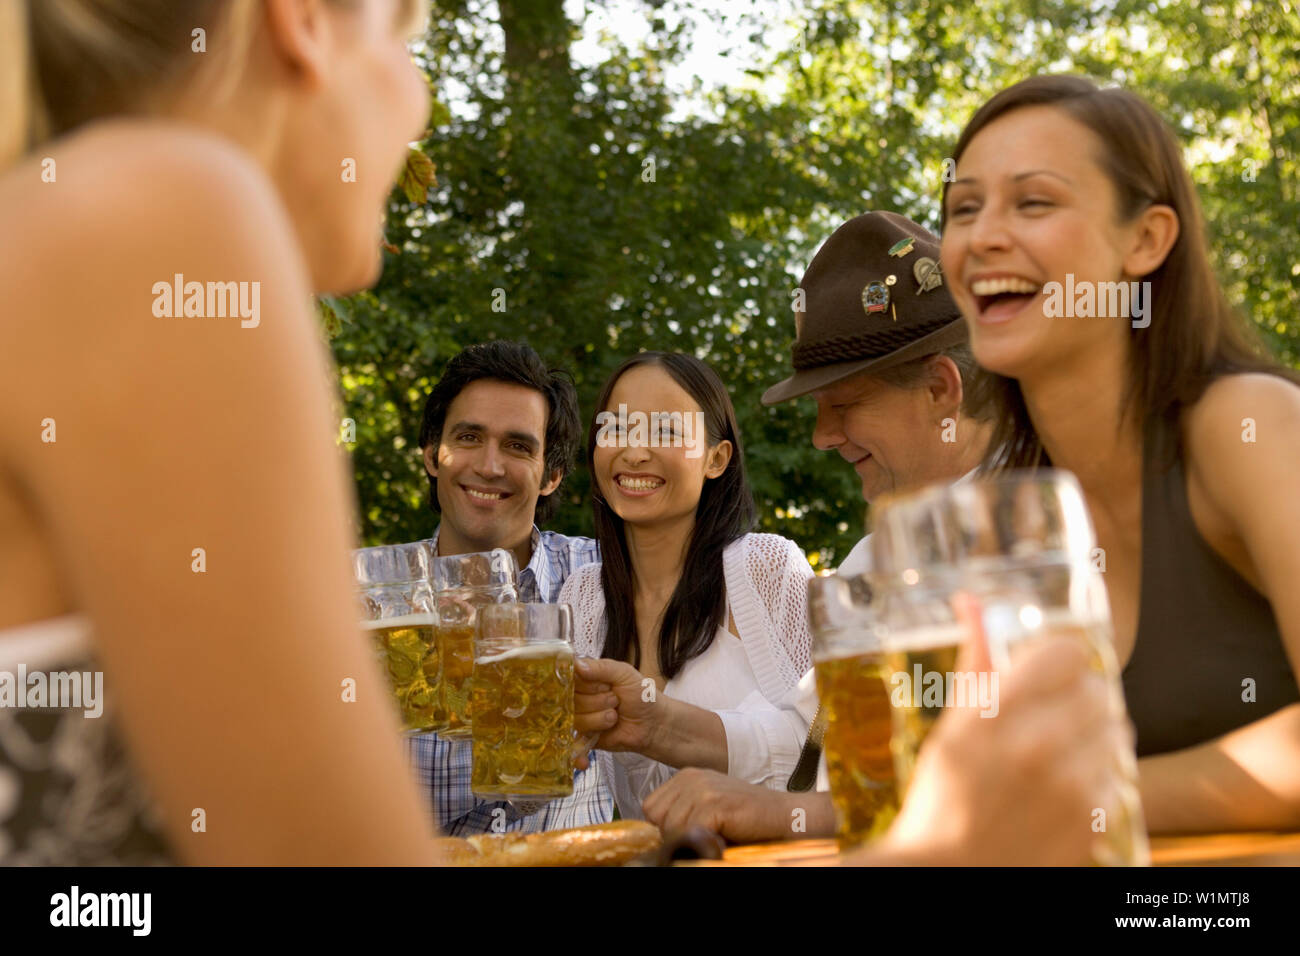 Friends in a beer garden, clinking glasses, Lake Starnberger, Bavaria, Germany Stock Photo